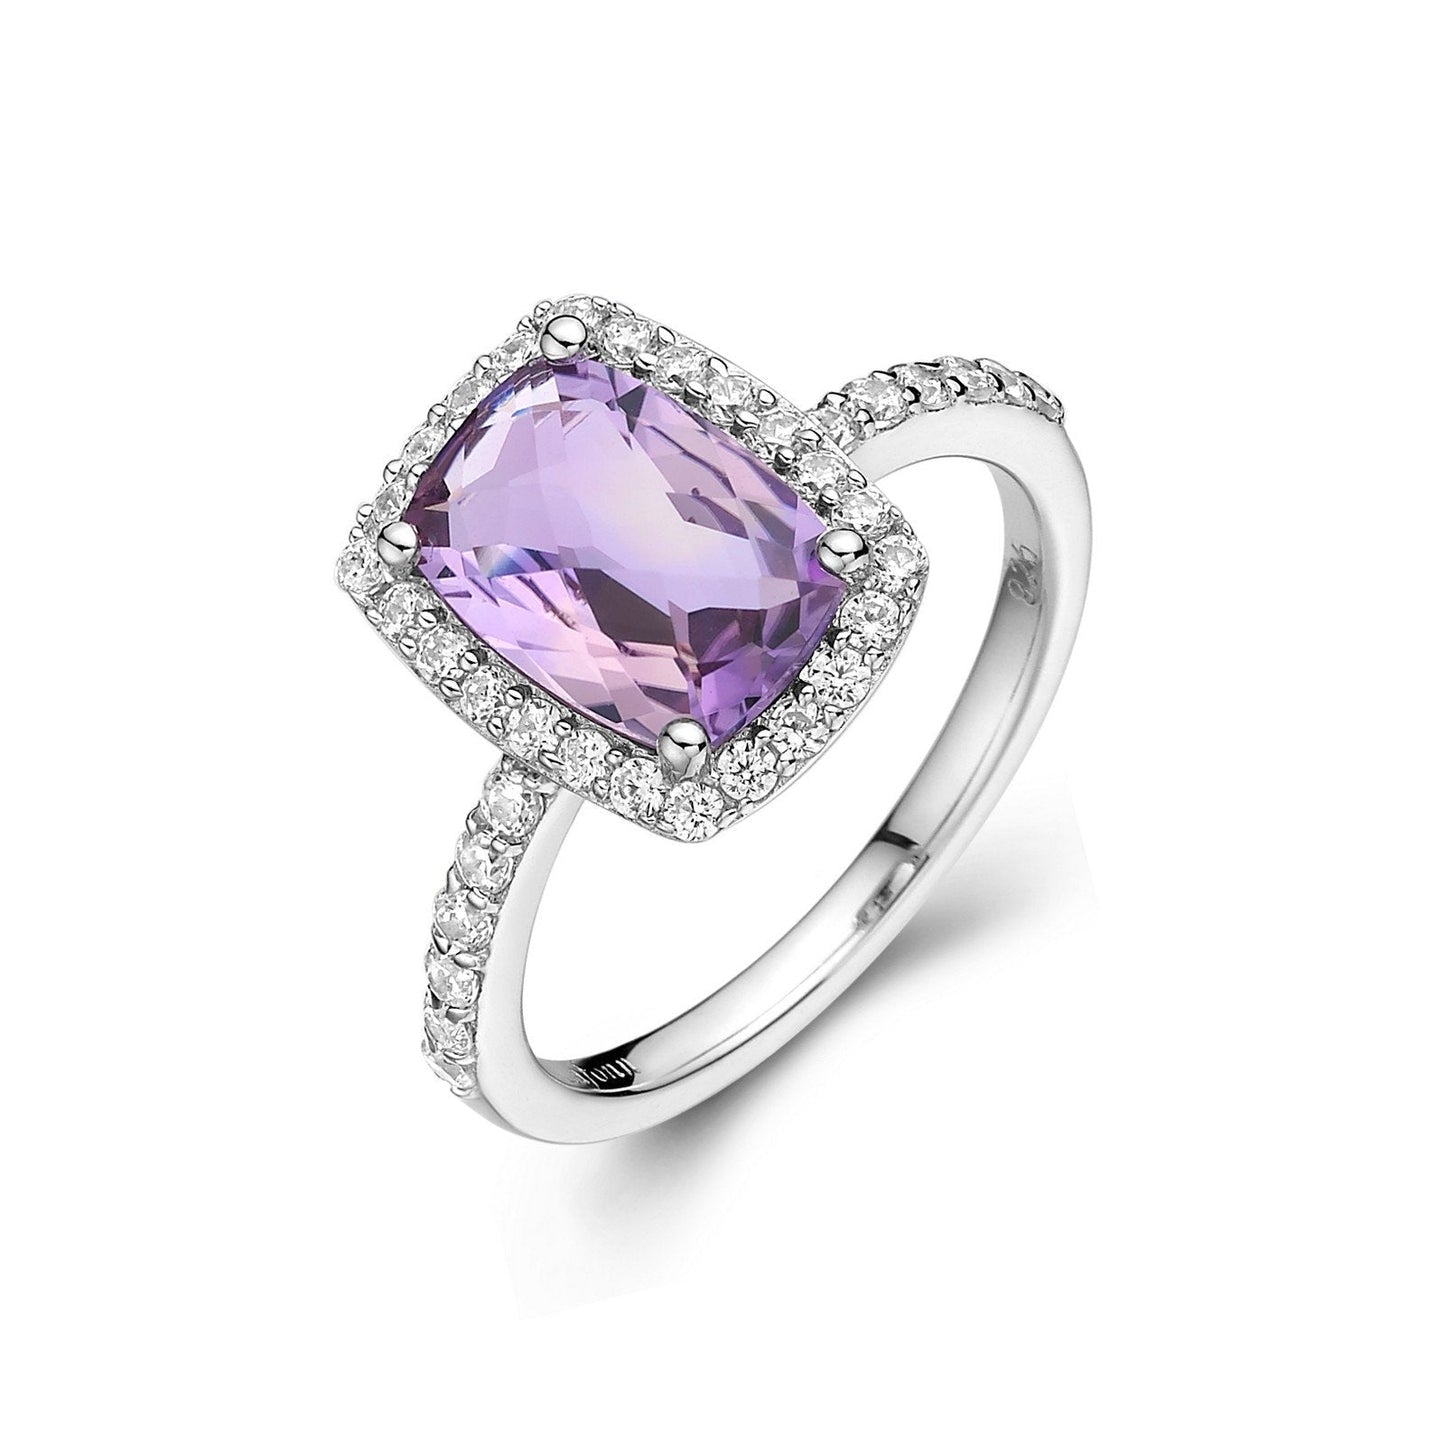 Load image into Gallery viewer, Lafonn Genuine Amethyst Halo Ring Amethyst RINGS Size 7 Platinum Appx CTW: 3.73 cts. Amethyst: Appx 3.21 cts.  Lassaire simulated diamonds: 0.52 cts. CTS 
